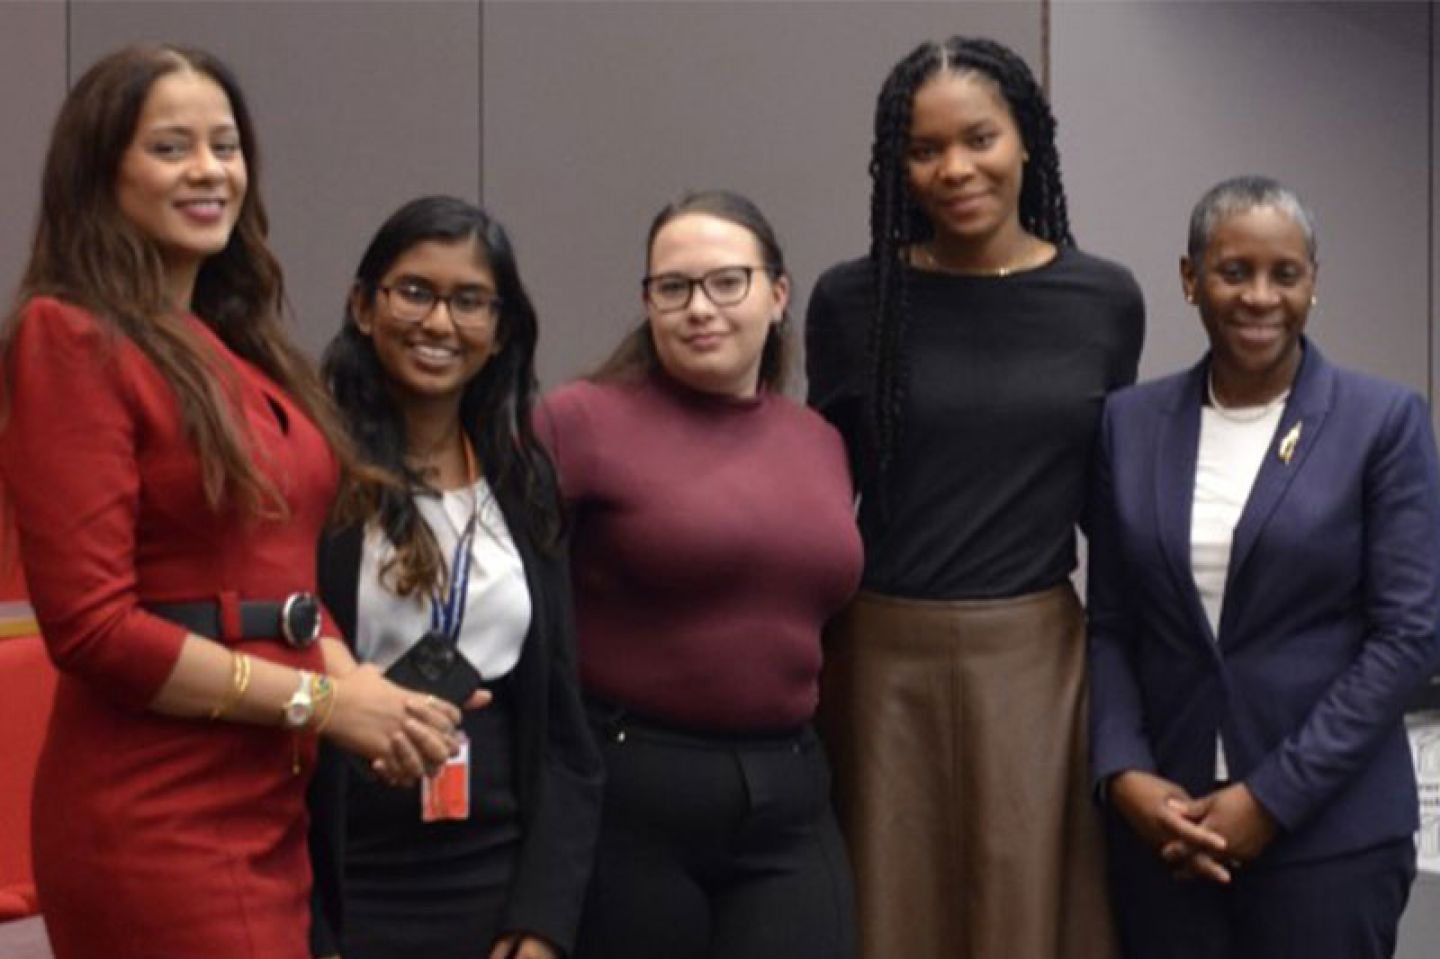 Women in Law students with speaker at Black History Month event.  Far right: Dr Miranda Brawn (Founder and President of The Miranda Brawn Diversity Leadership Foundation and Senior Visiting Fellow at Keble College, Oxford).  Far left: Dr I. Stephanie Boyce (the outgoing first Black President of The Law Society of England and Wales)